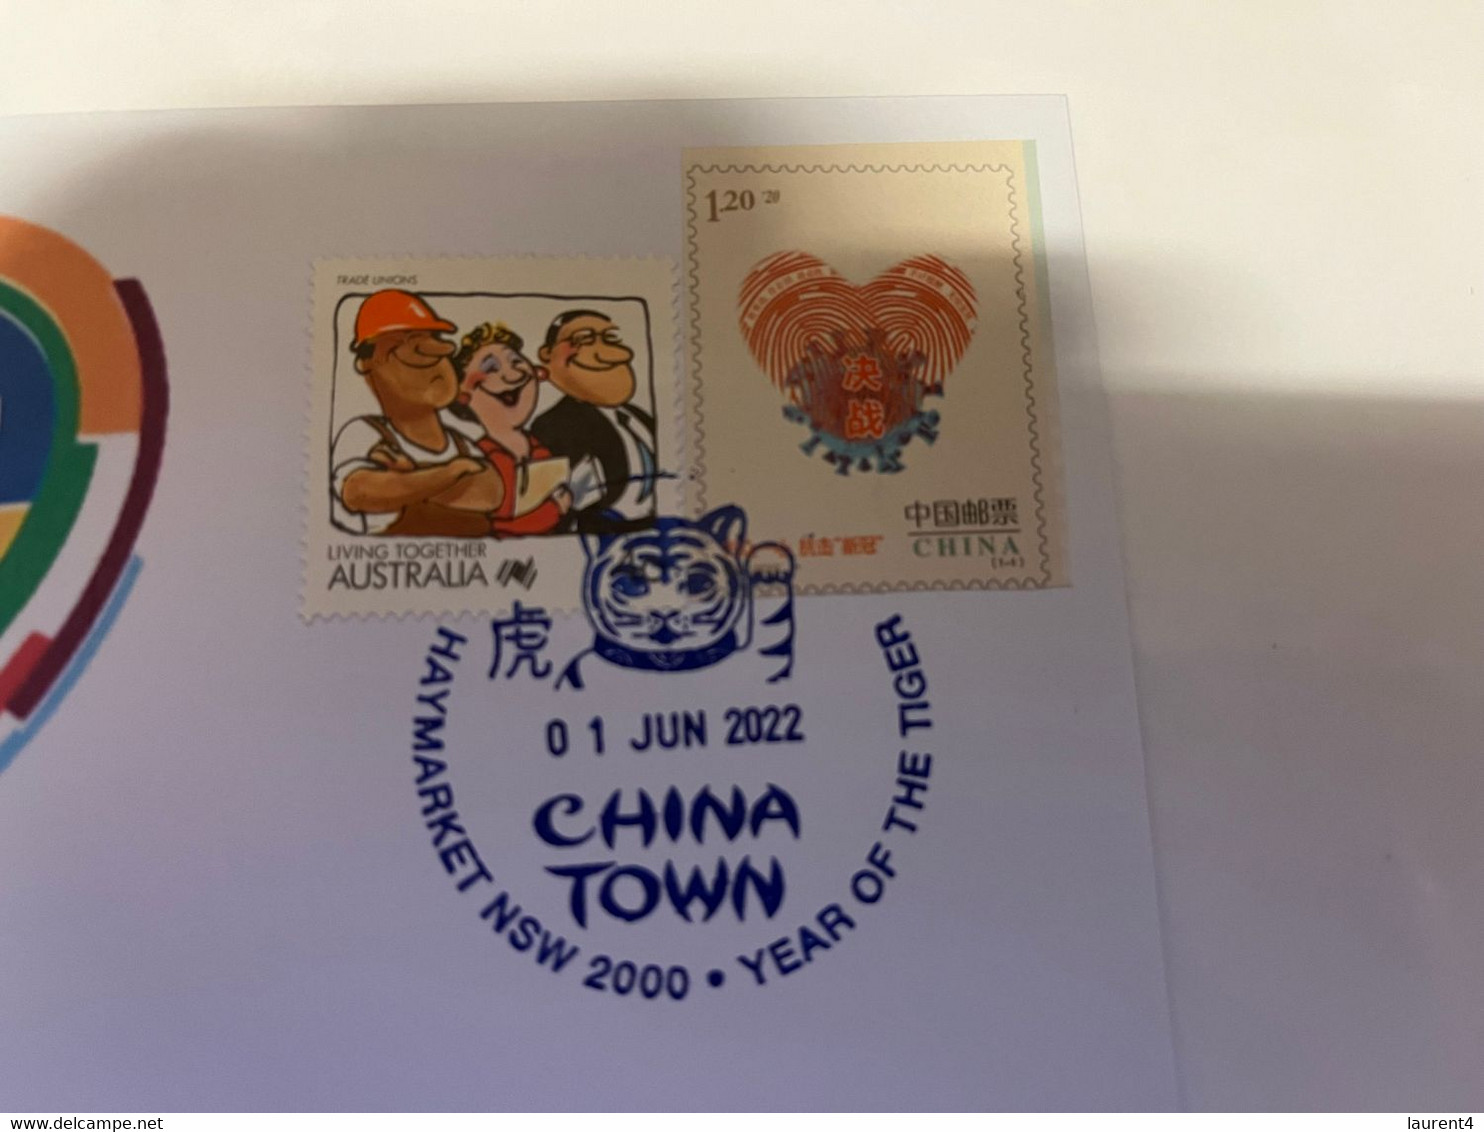 (1 G 55)  China Withdraw As Host Off Football 2023 Asian Cup Over COVID-19 Zero Policy - With OZ + China Stamps - AFC Asian Cup